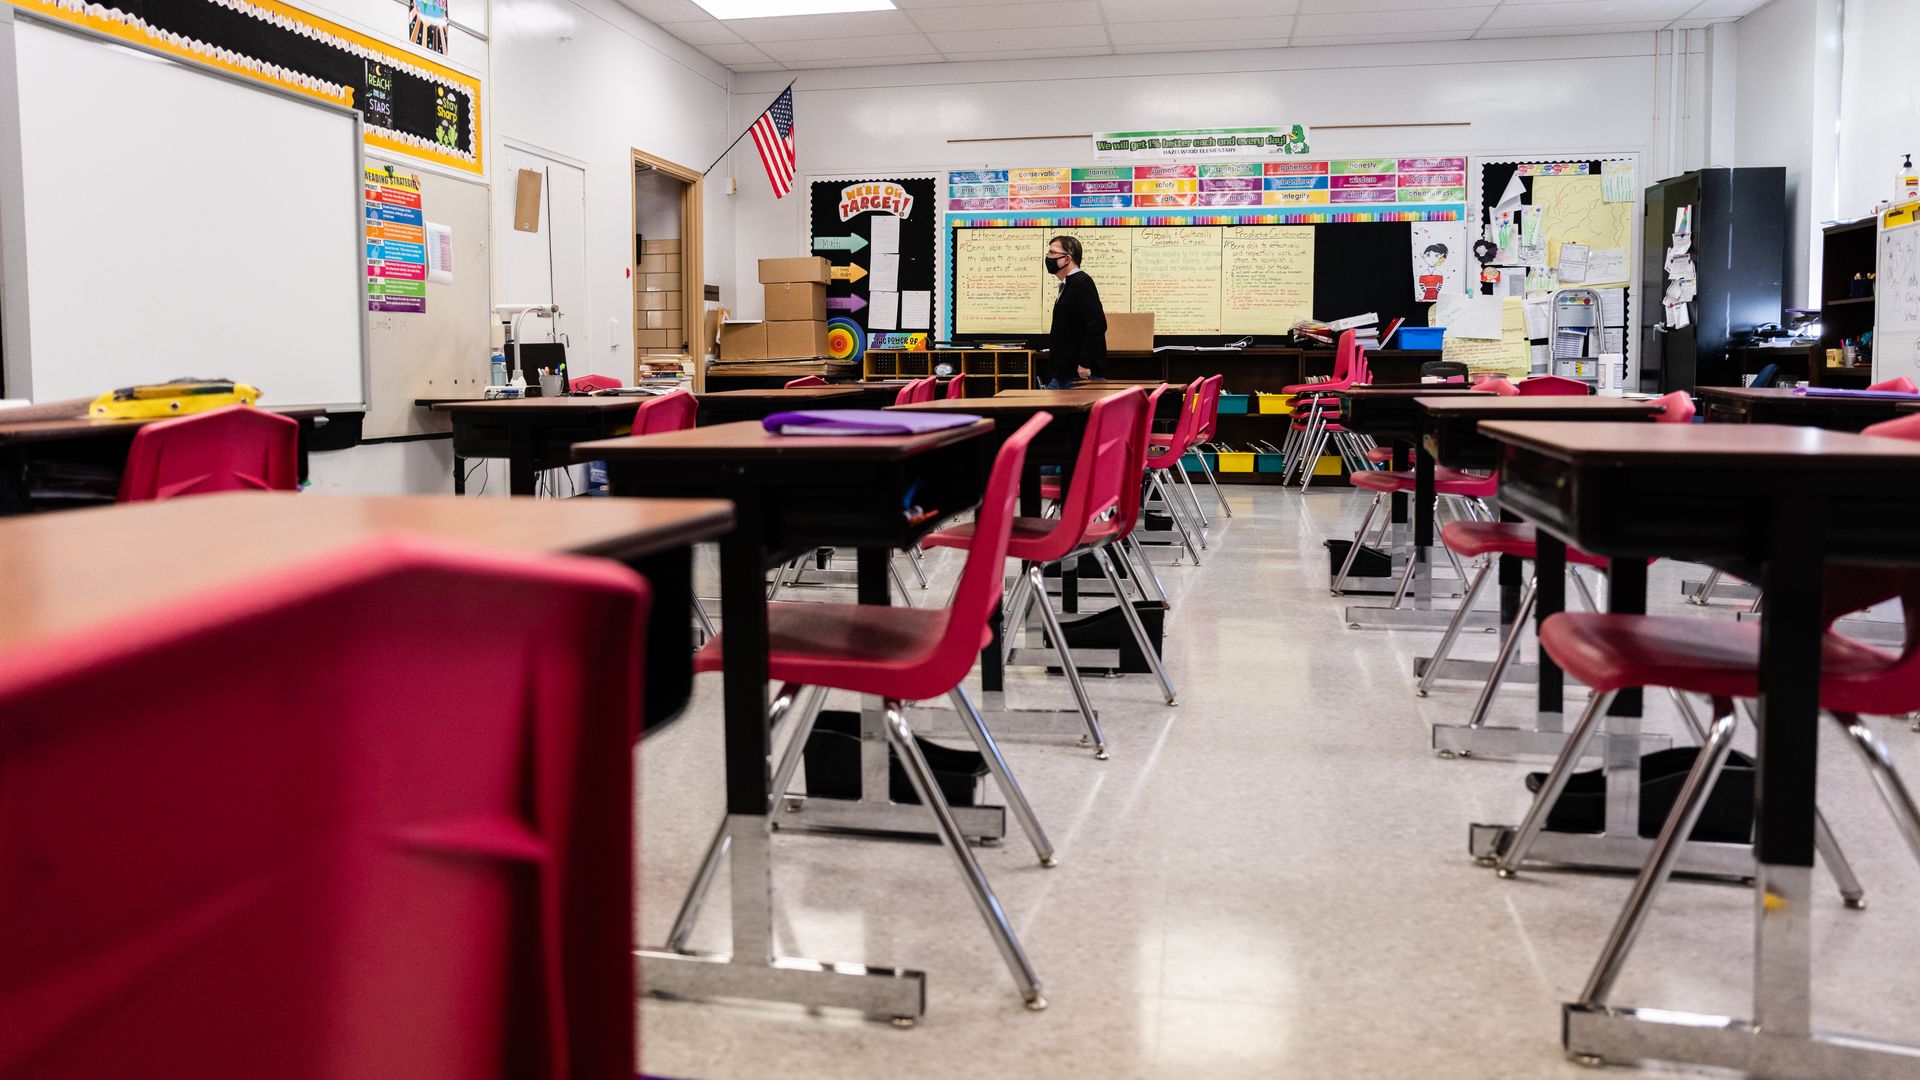 Photo of a masked person standing in the middle of a school classroom filled with desks and red chairs